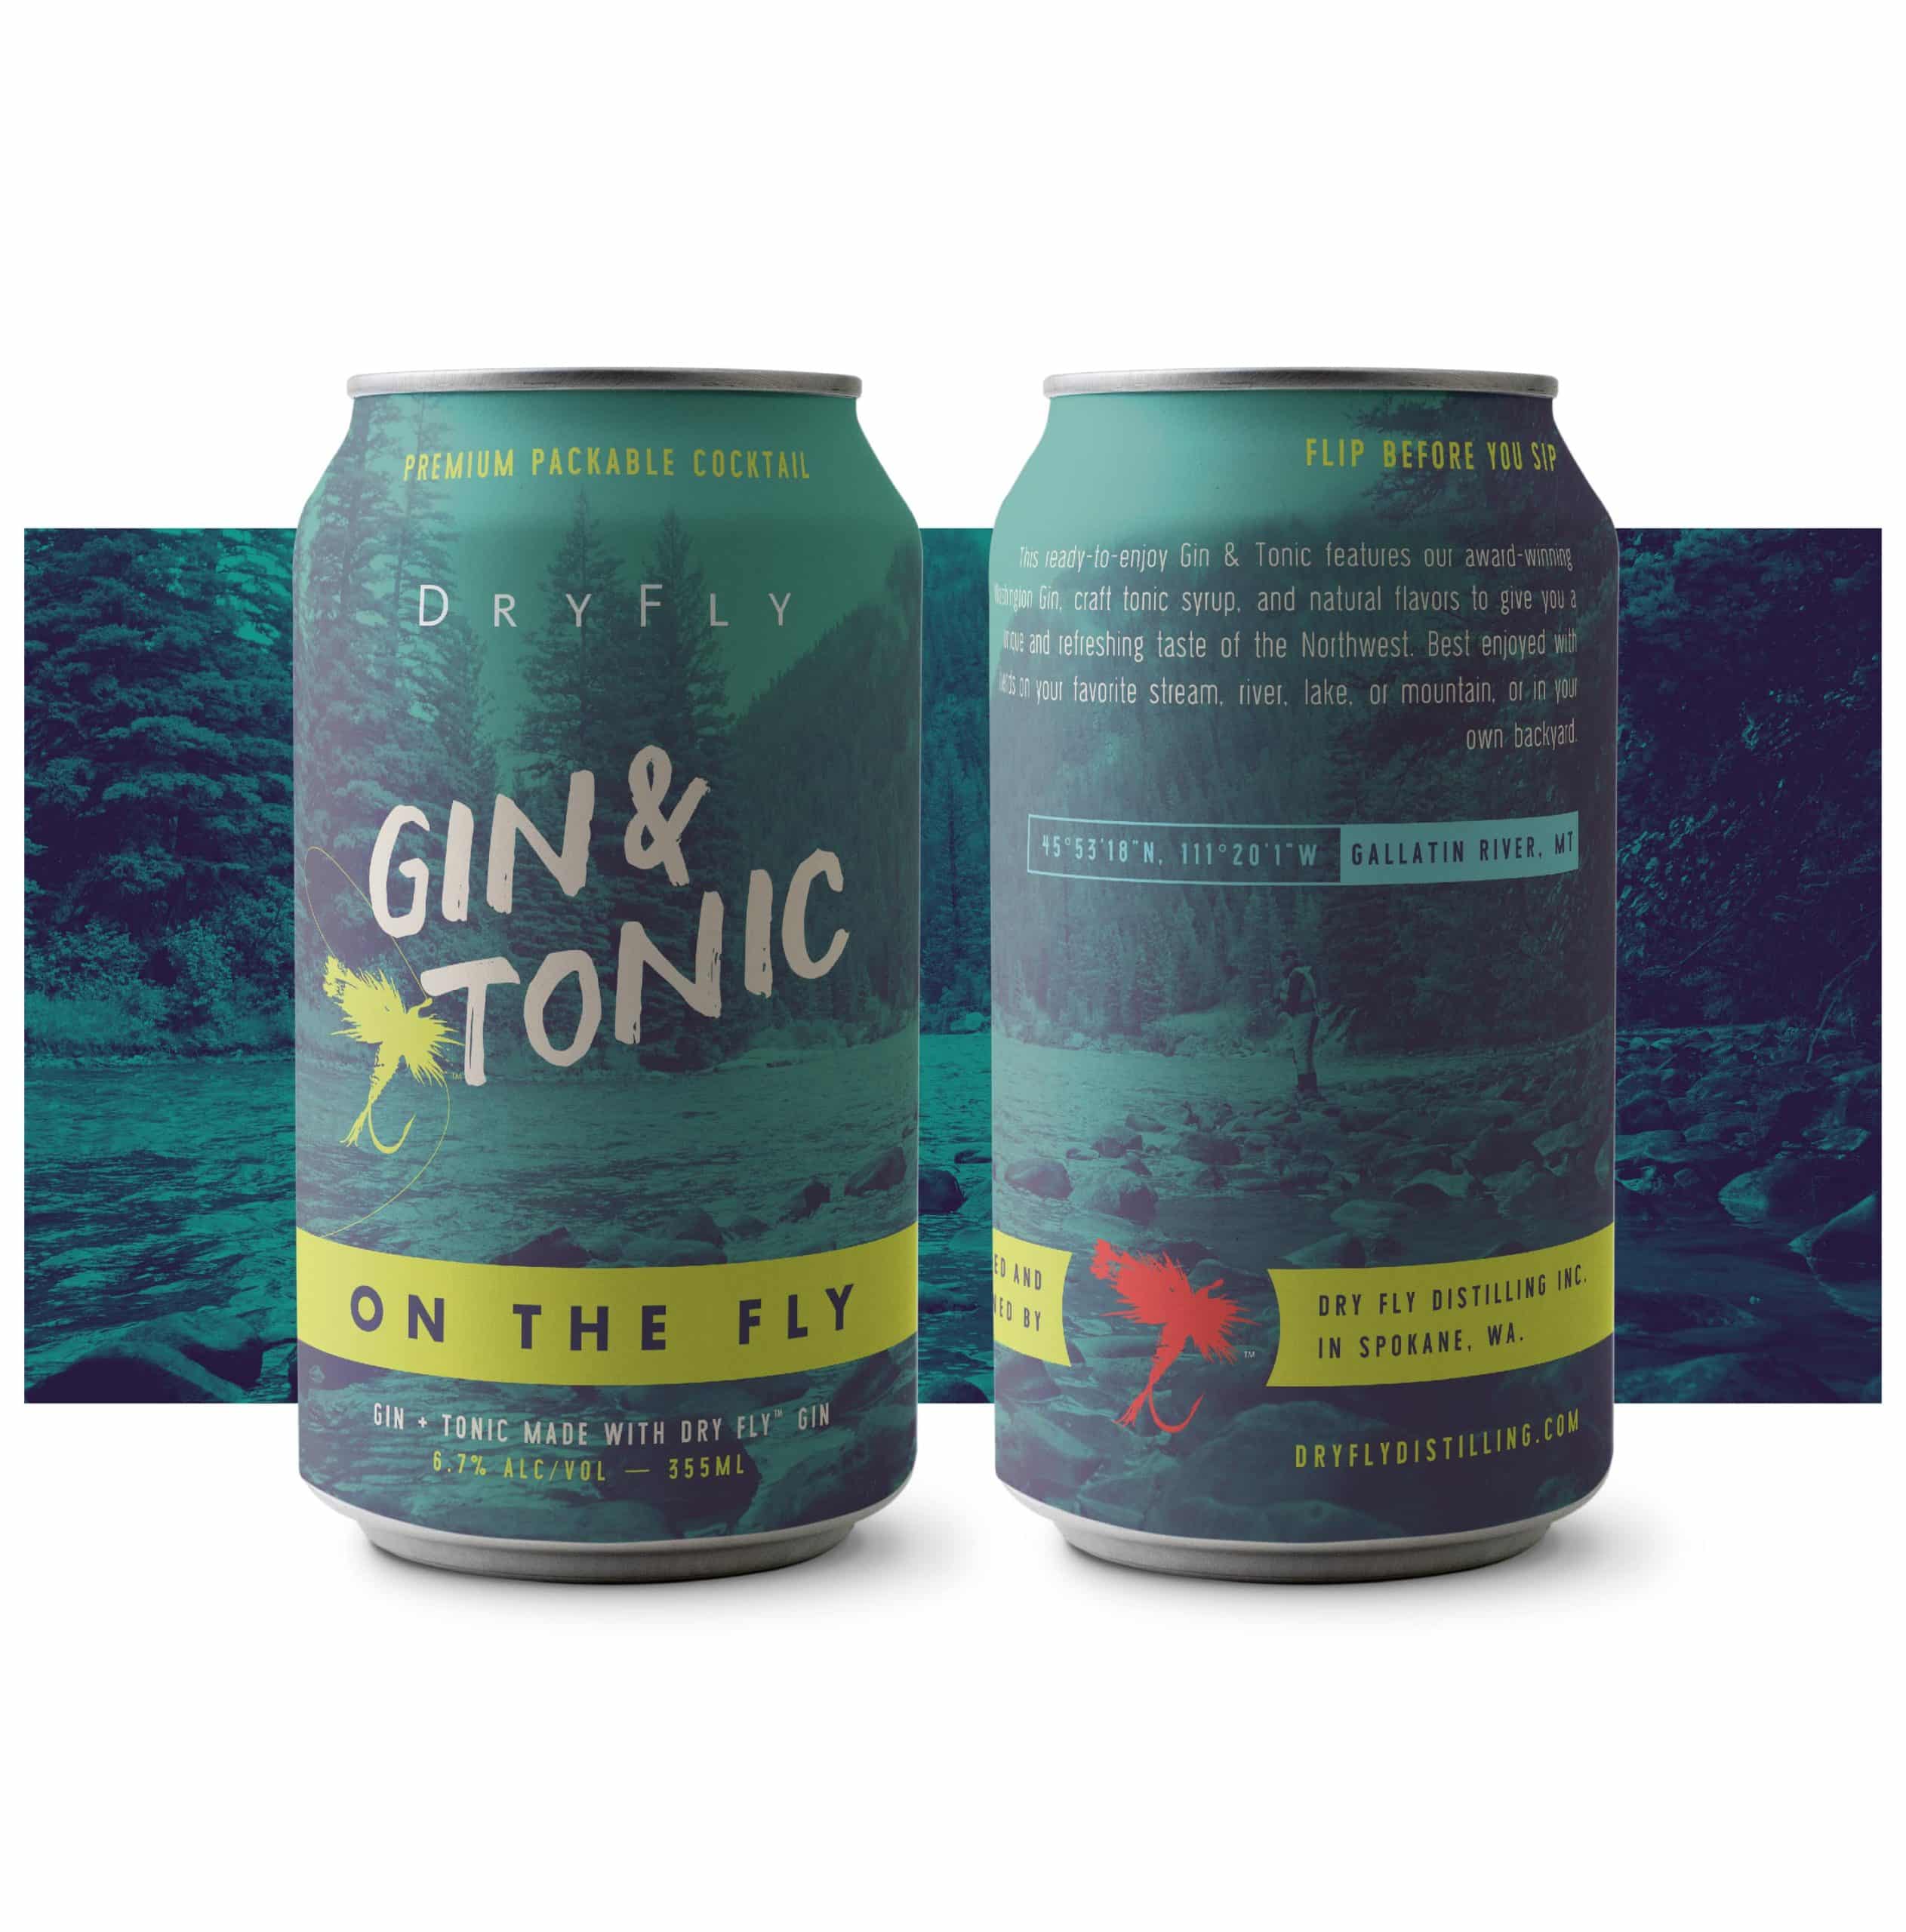 Dry Fly Gin and Tonic Canned Cocktail